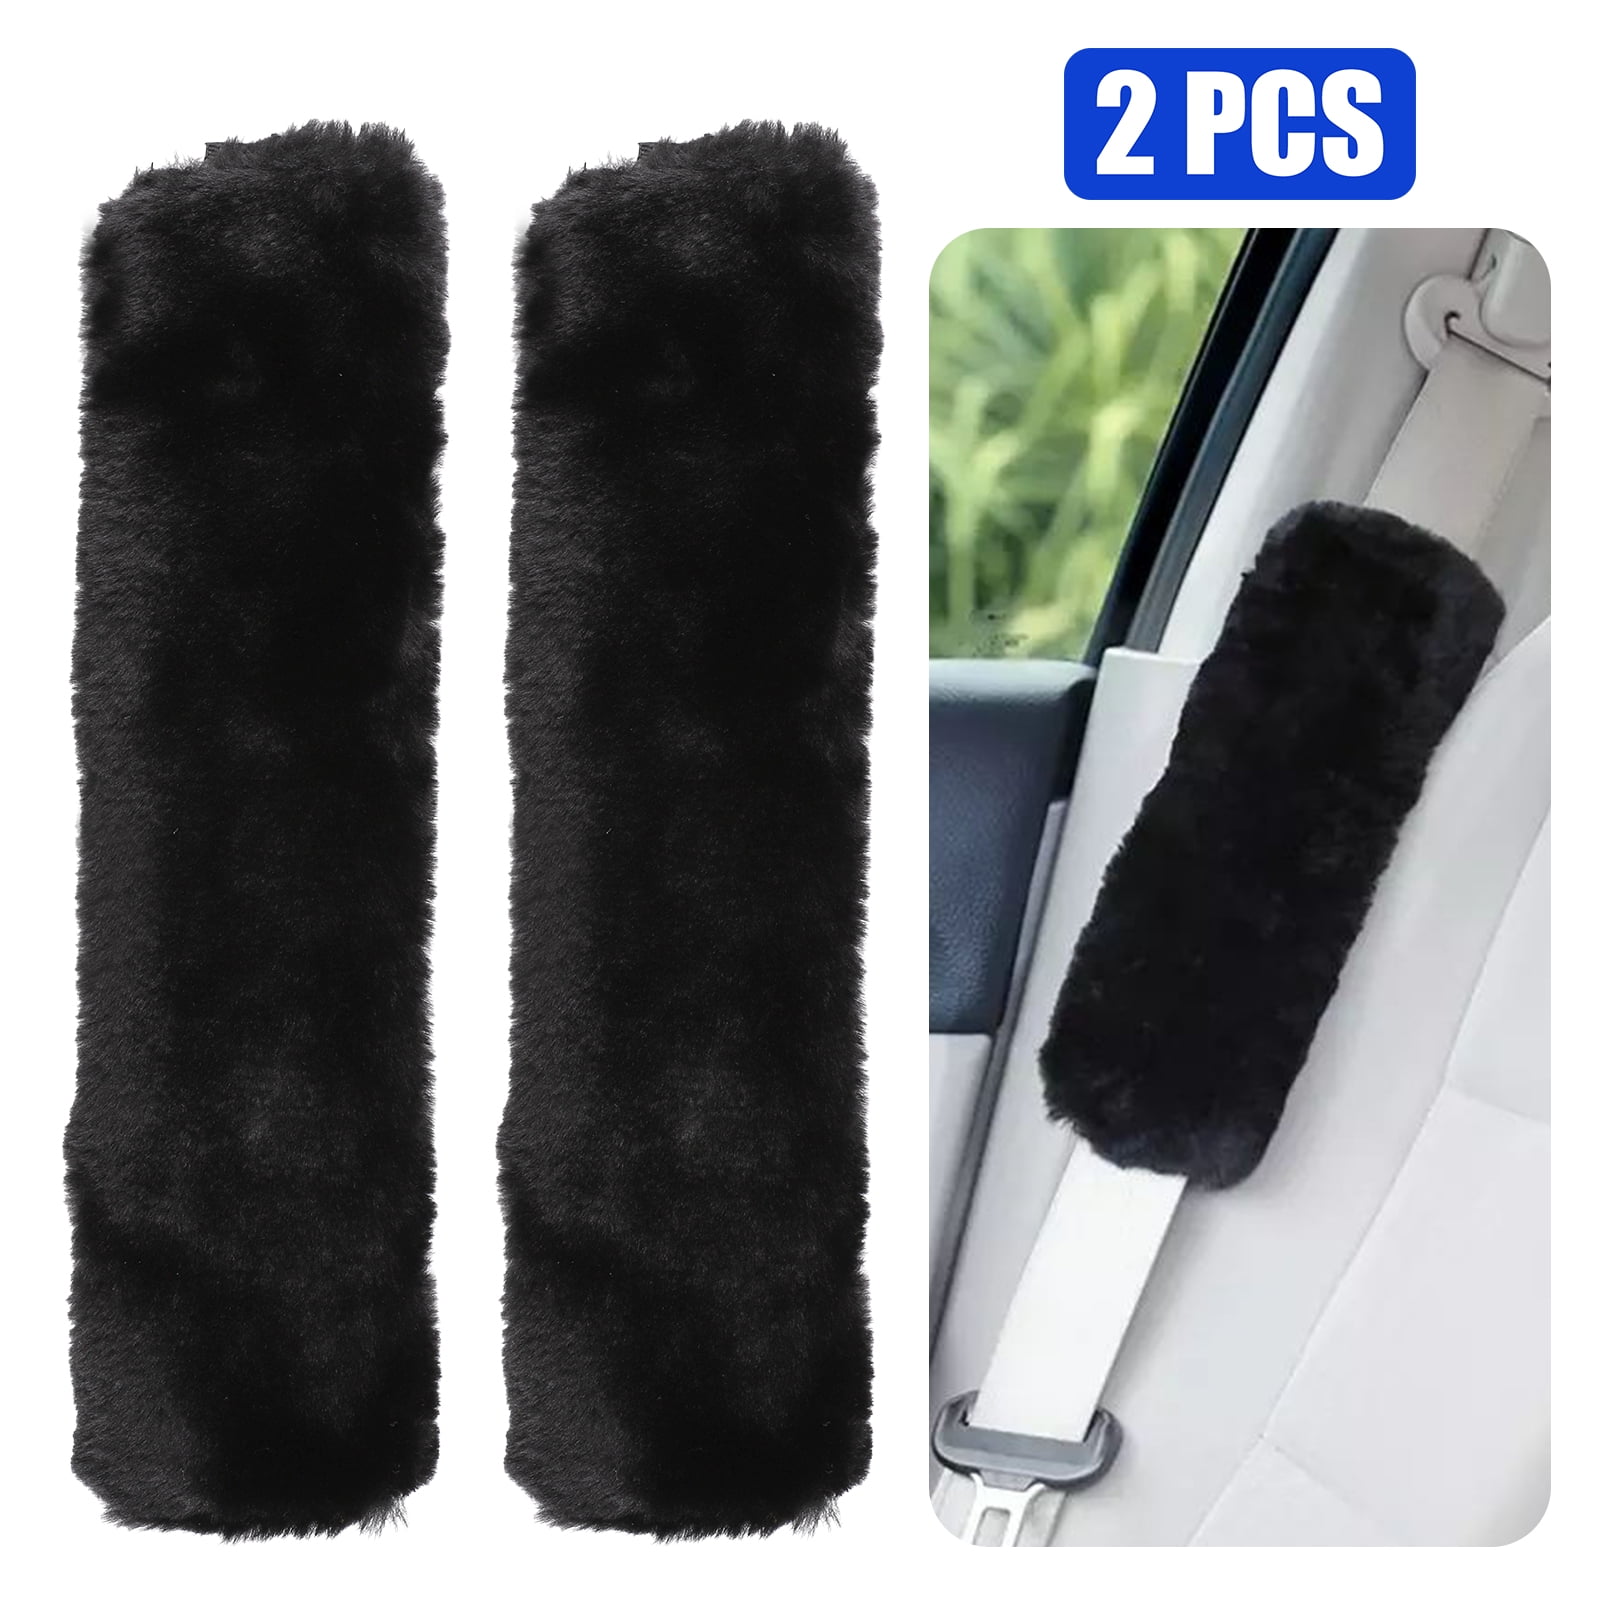 Universal Car Seat Shoulder Strap Pad Cover Safety Belt Protector Interior  Seatbelt Cover For Adults Kids For BMW Accessories Black 2pcs